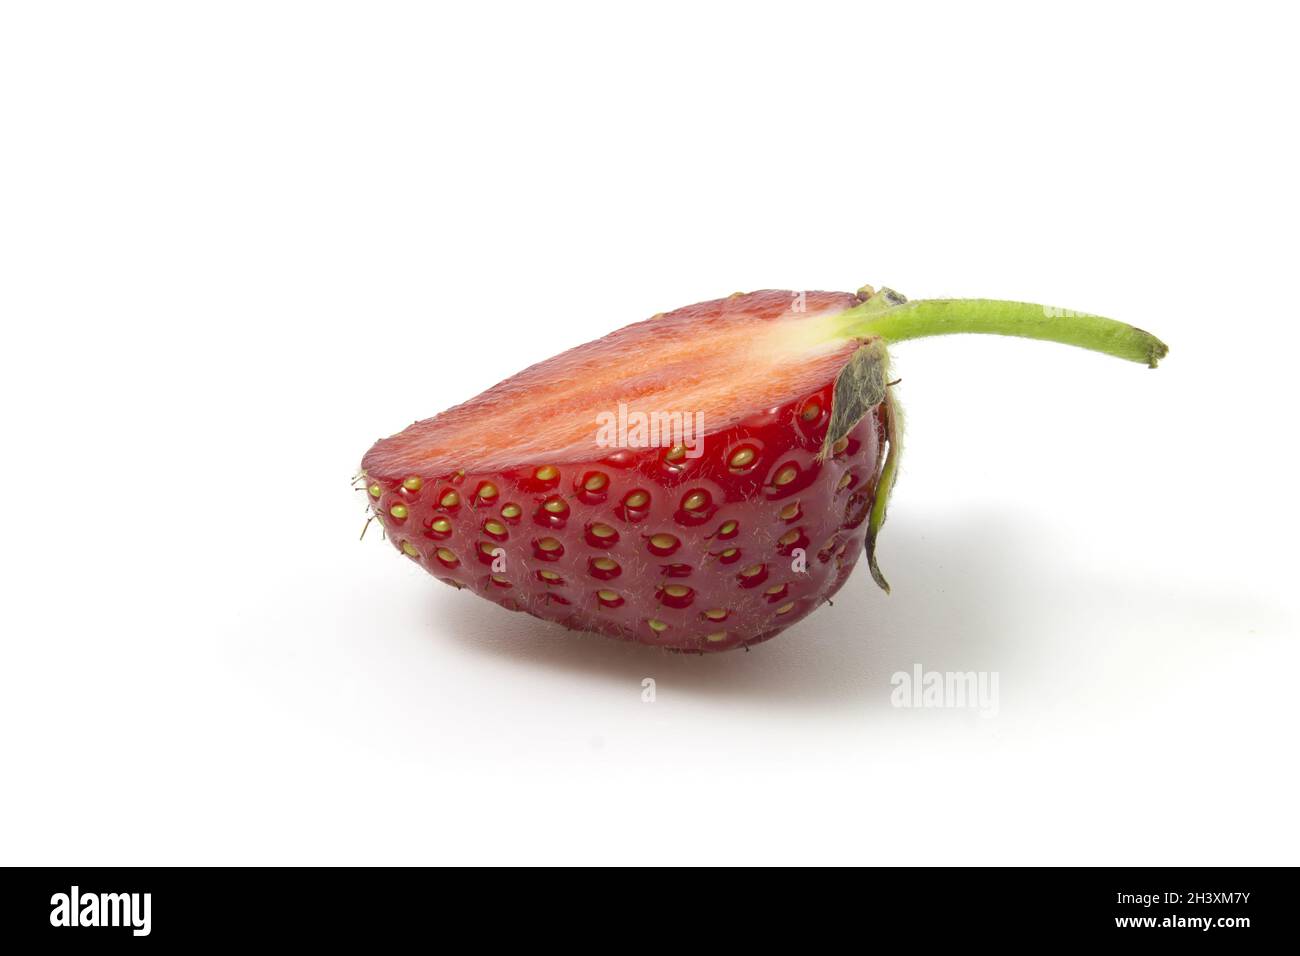 Strawberries in section lies sideways isolated on a white background. Full focus. Stock Photo